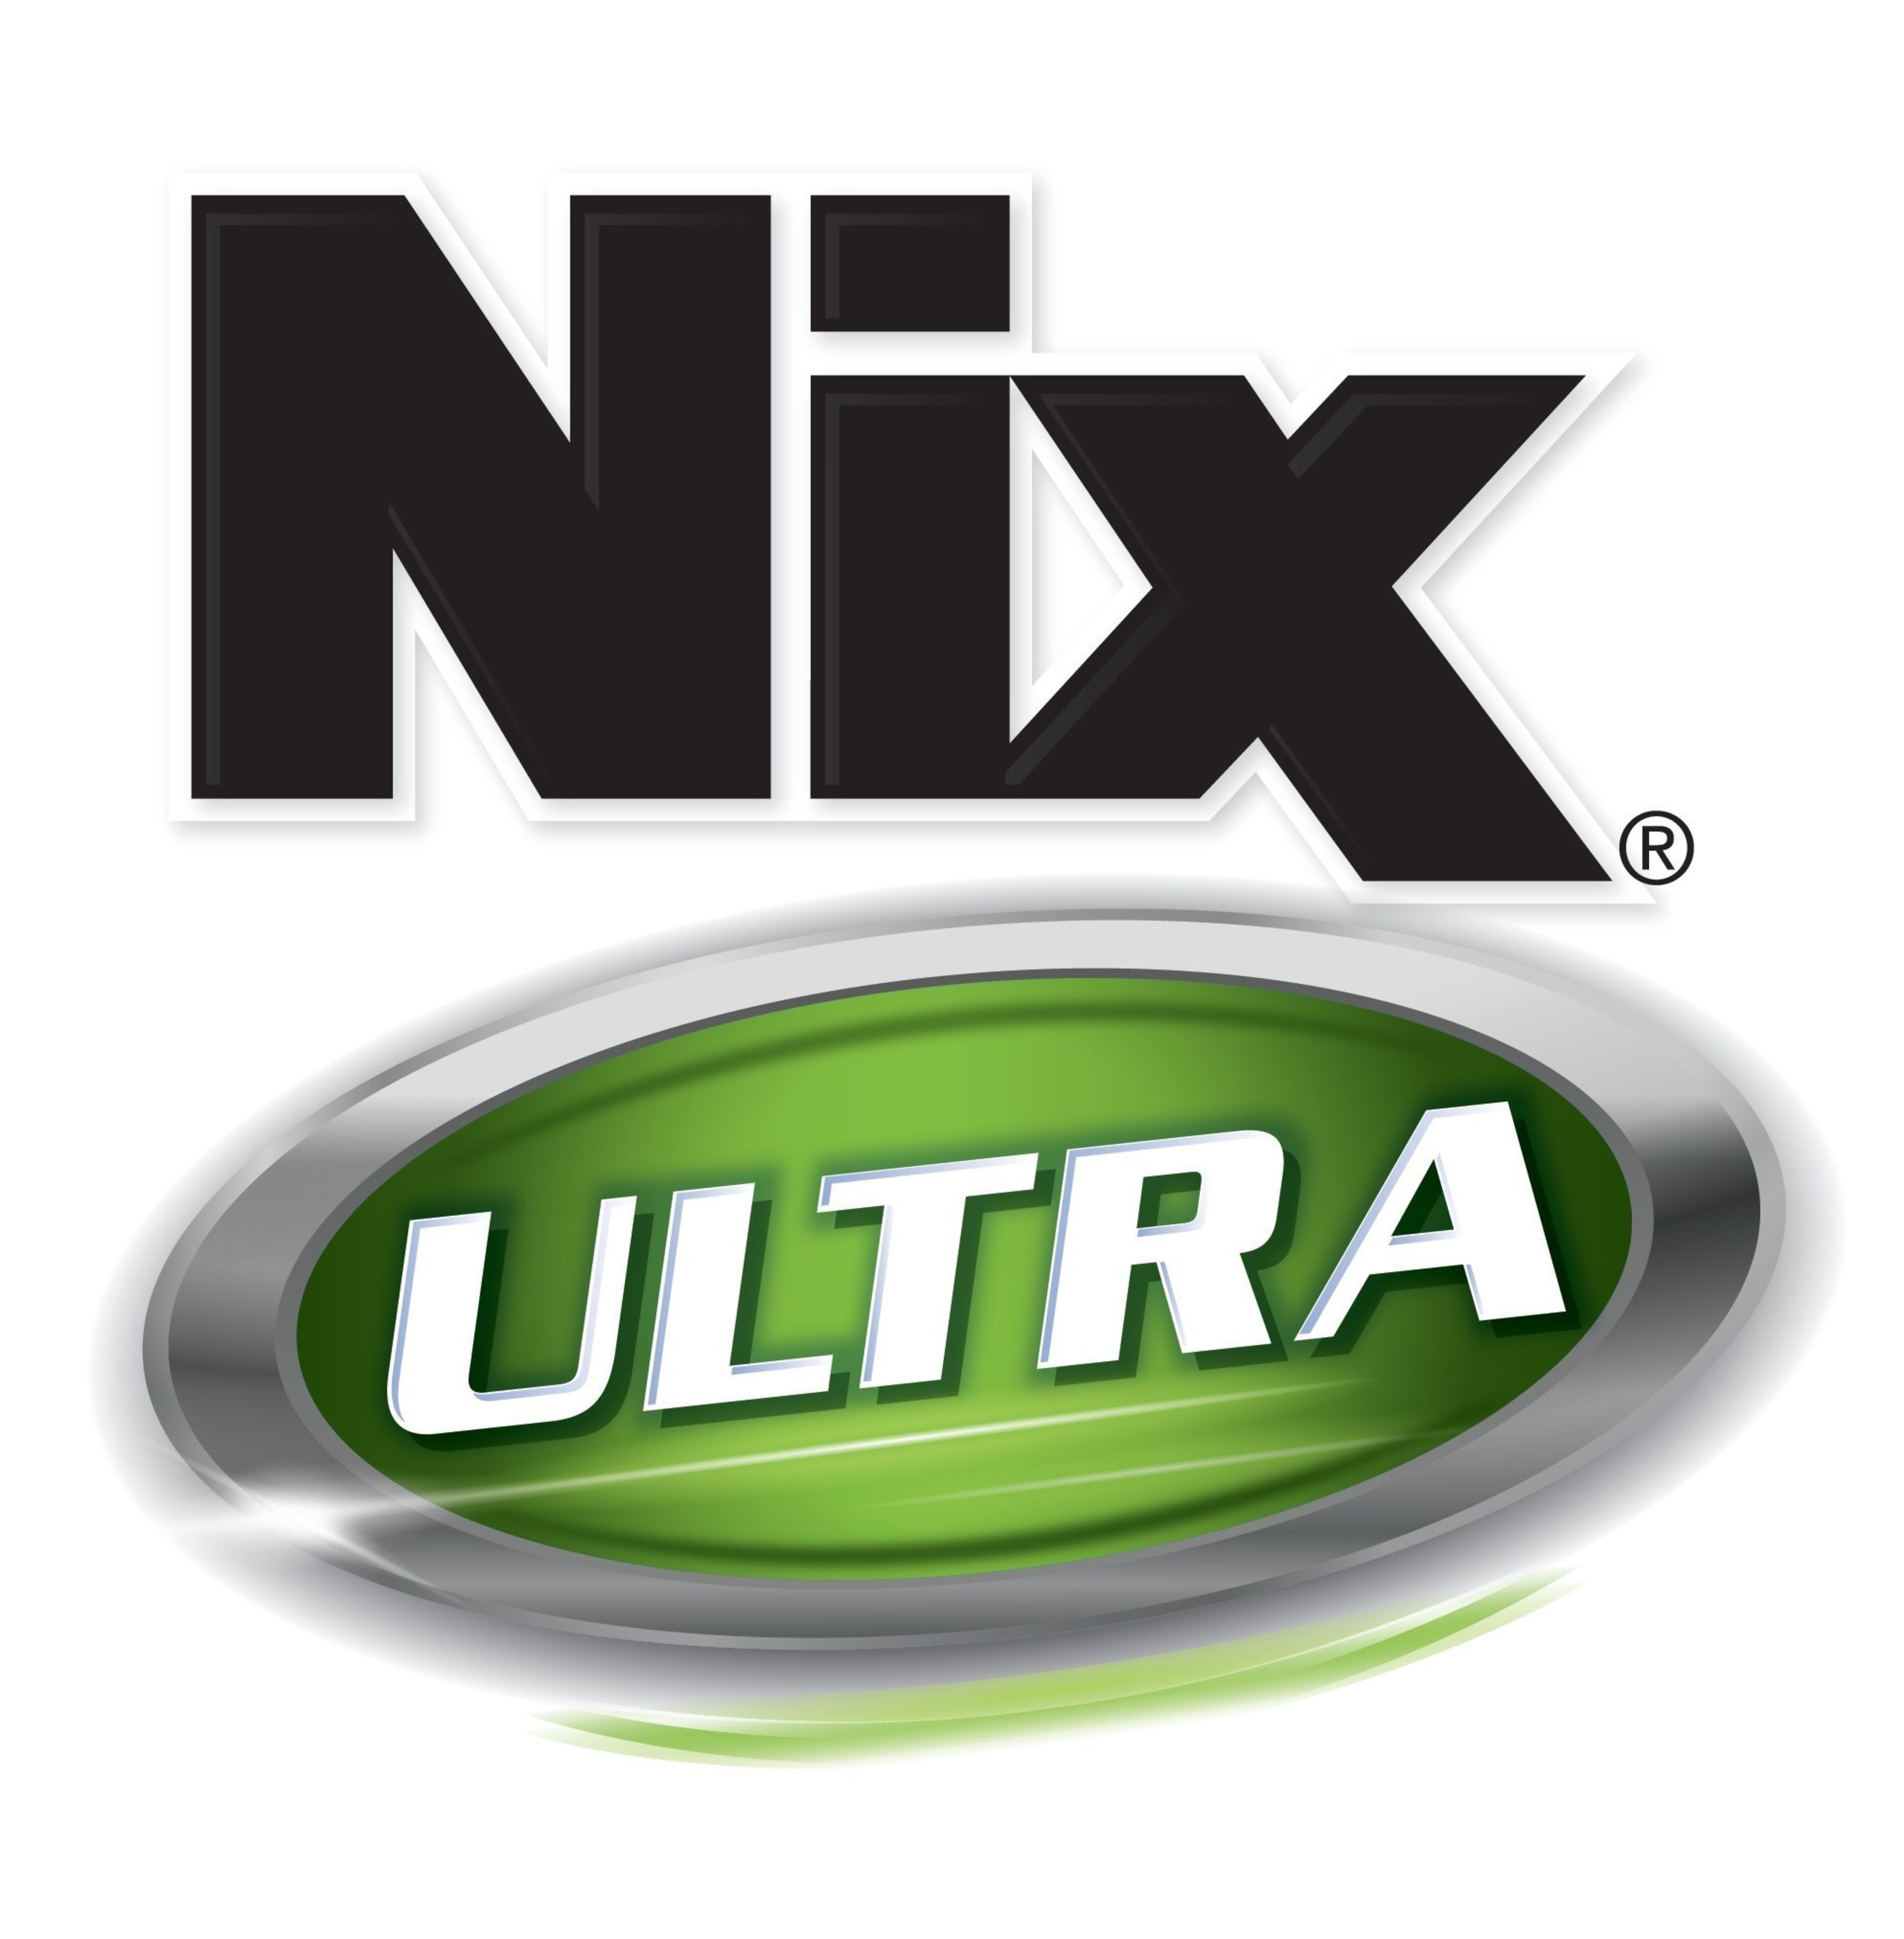 Nix(R) recently launched pesticide-free Nix(R) Ultra, a safe and effective over-the-counter system that eliminates both traditional and super lice, as well as their eggs.